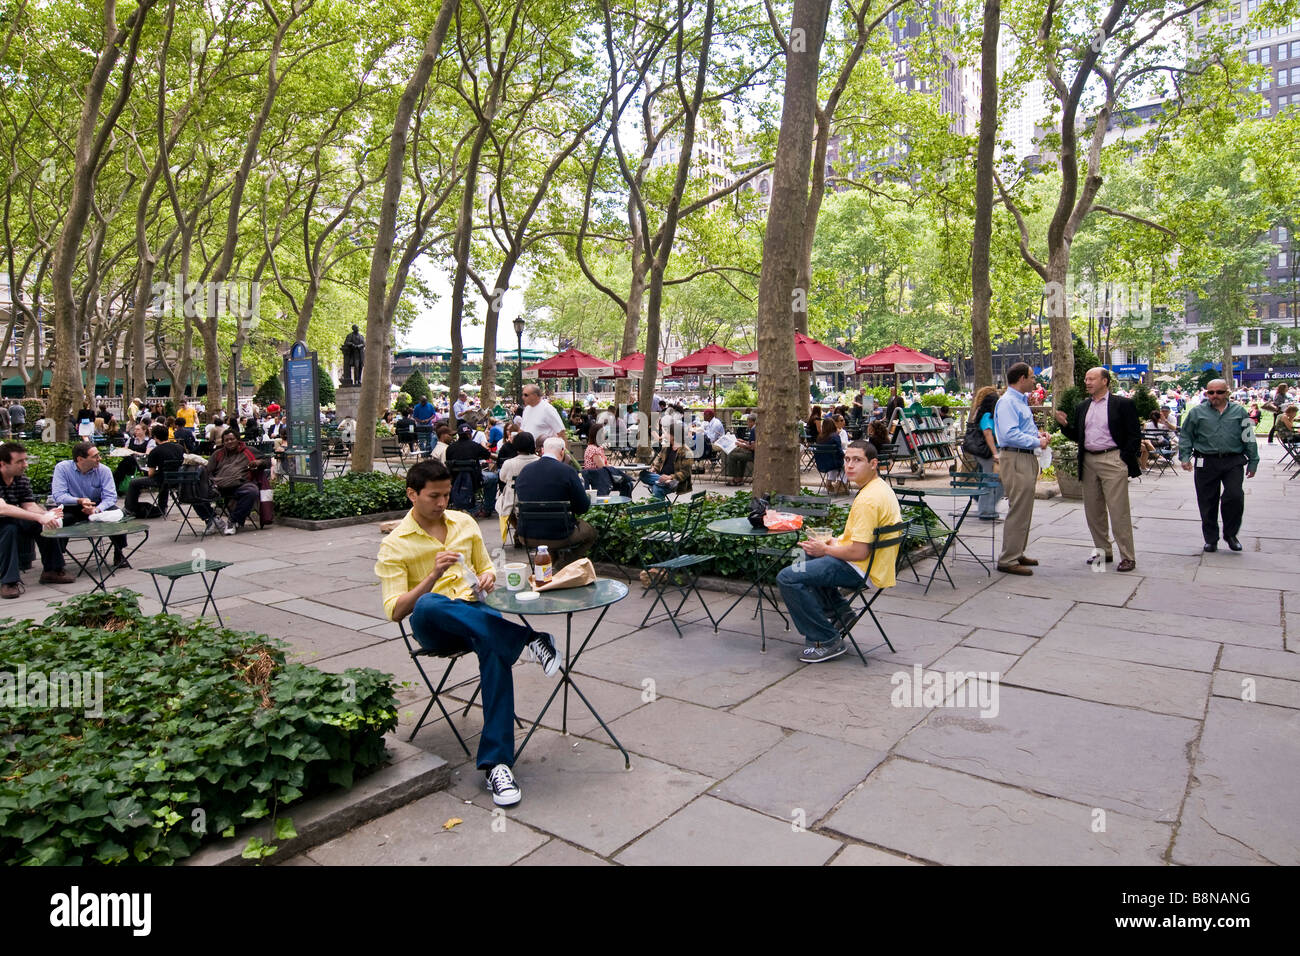 People sitting at small tables under tall trees in a public garden Stock Photo